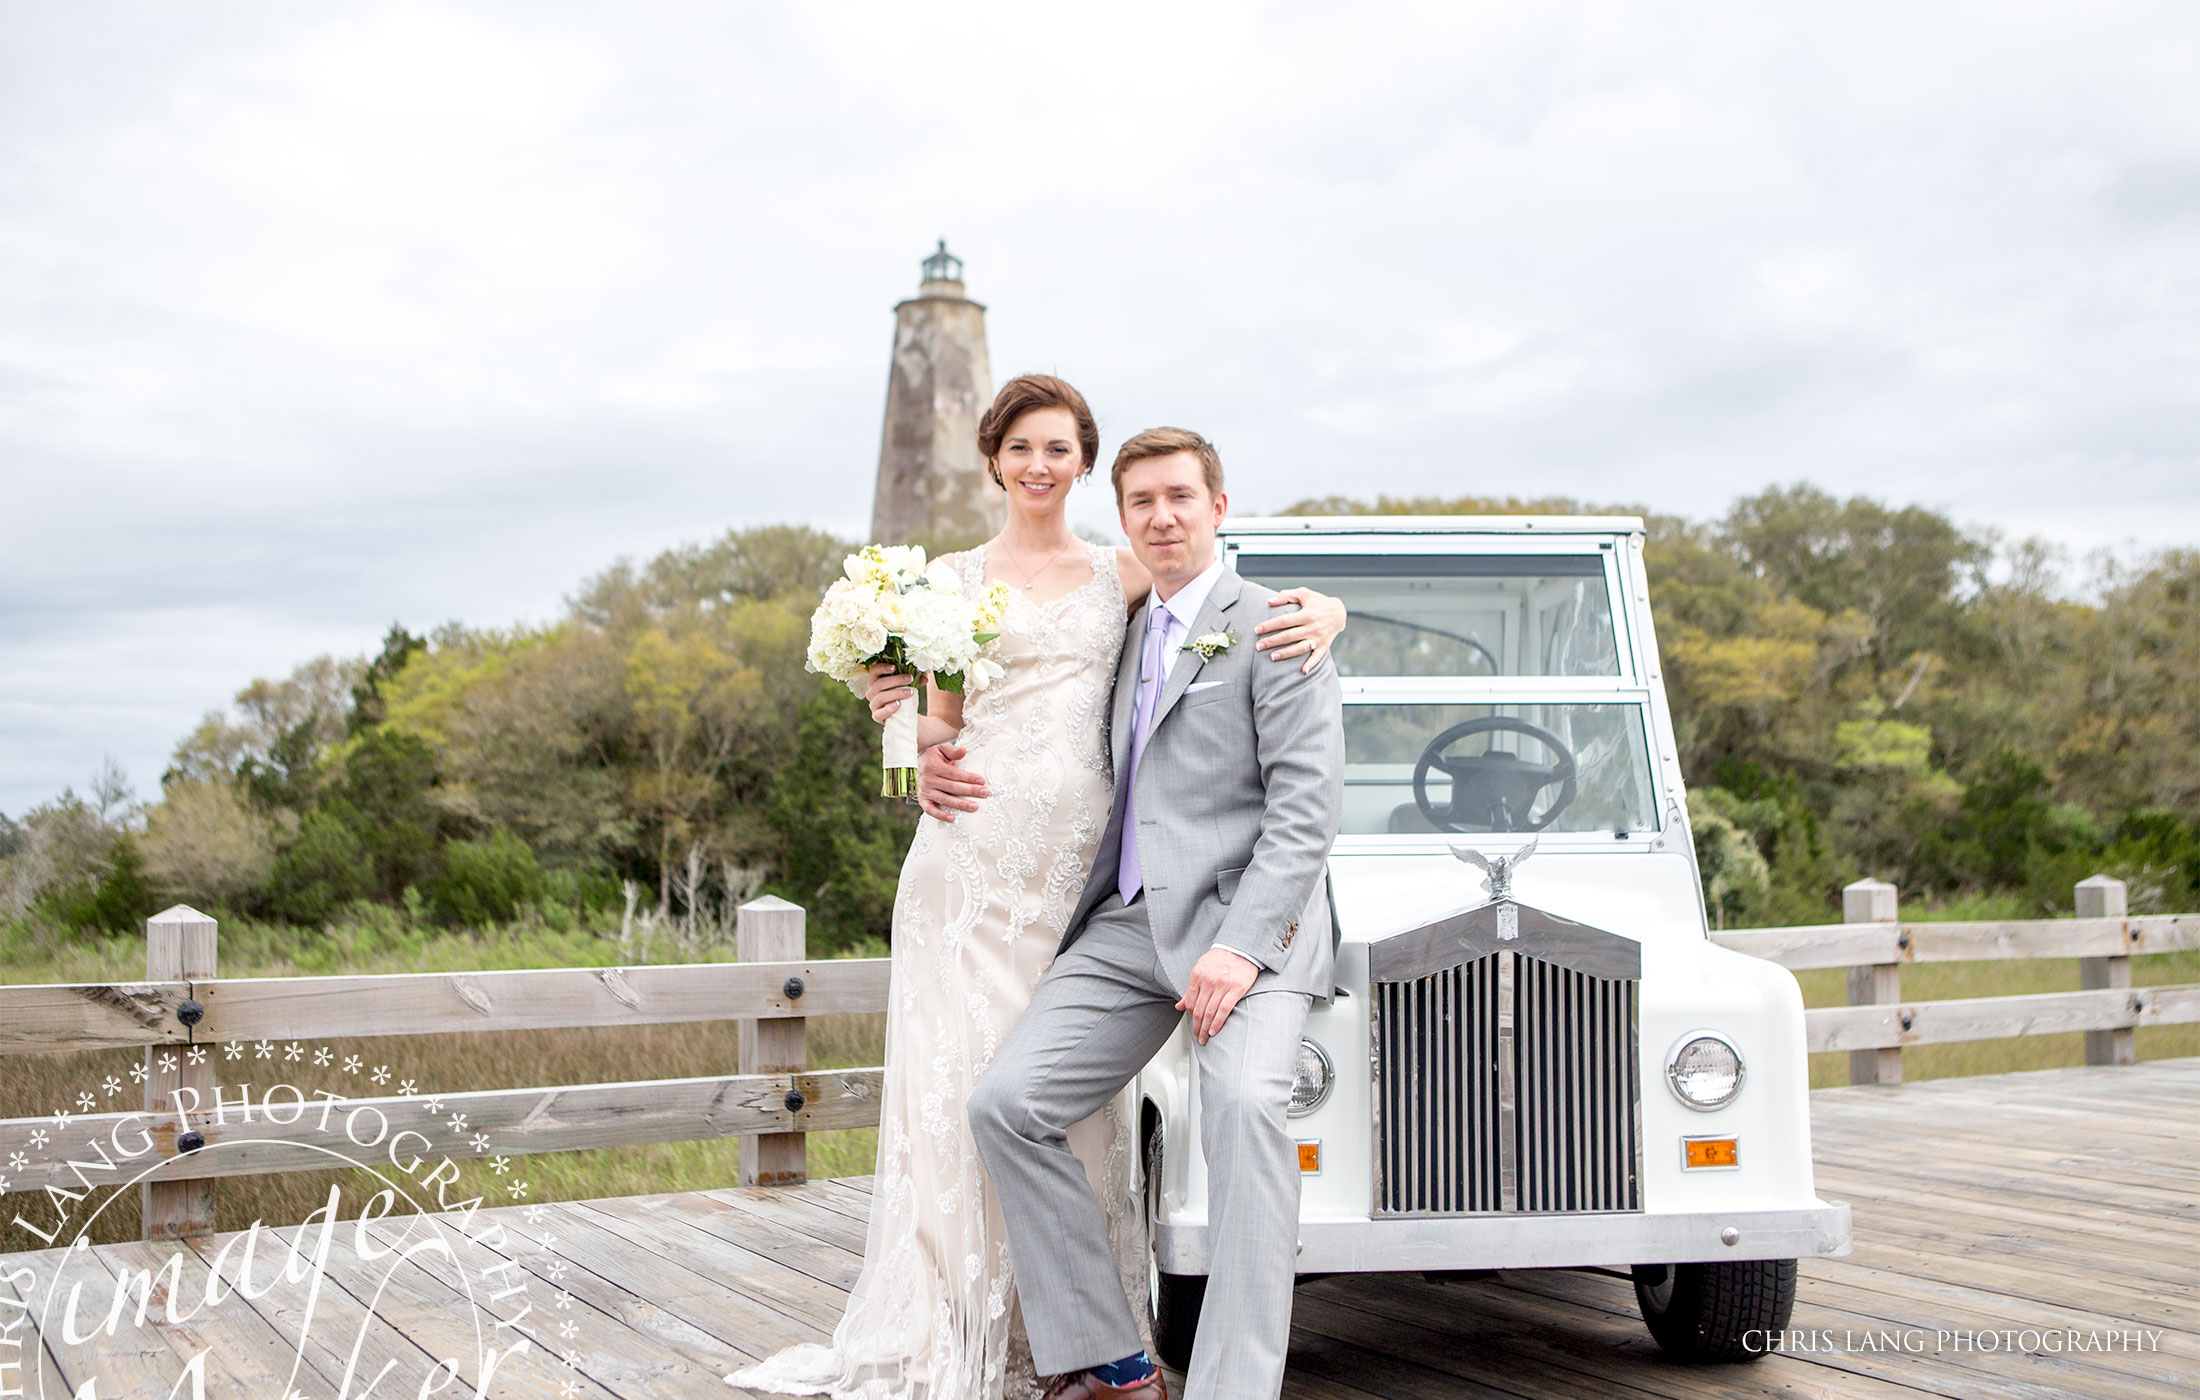 Bald Head Island NC Wedding Photographers - Wedding Photo - Bride & Groom picture in front of Old Baldy Lighthouse - Wedding Bouquet - Chris Lang Photography -  Destination Wedding - Bald Head Island Wedding Venue 